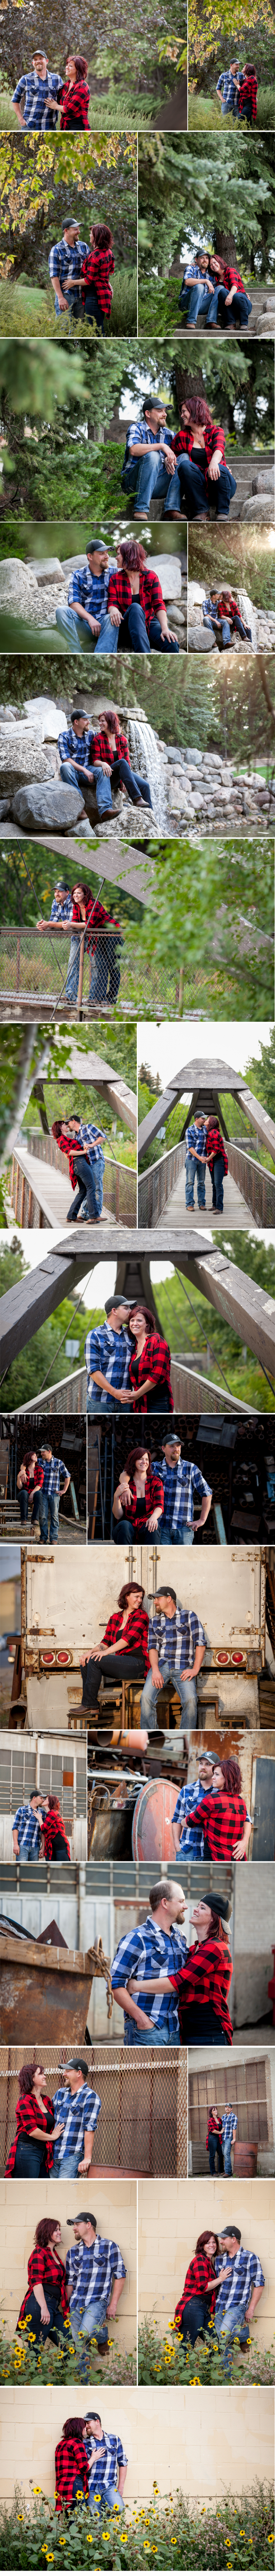 andrea-tyler-engagement-photos